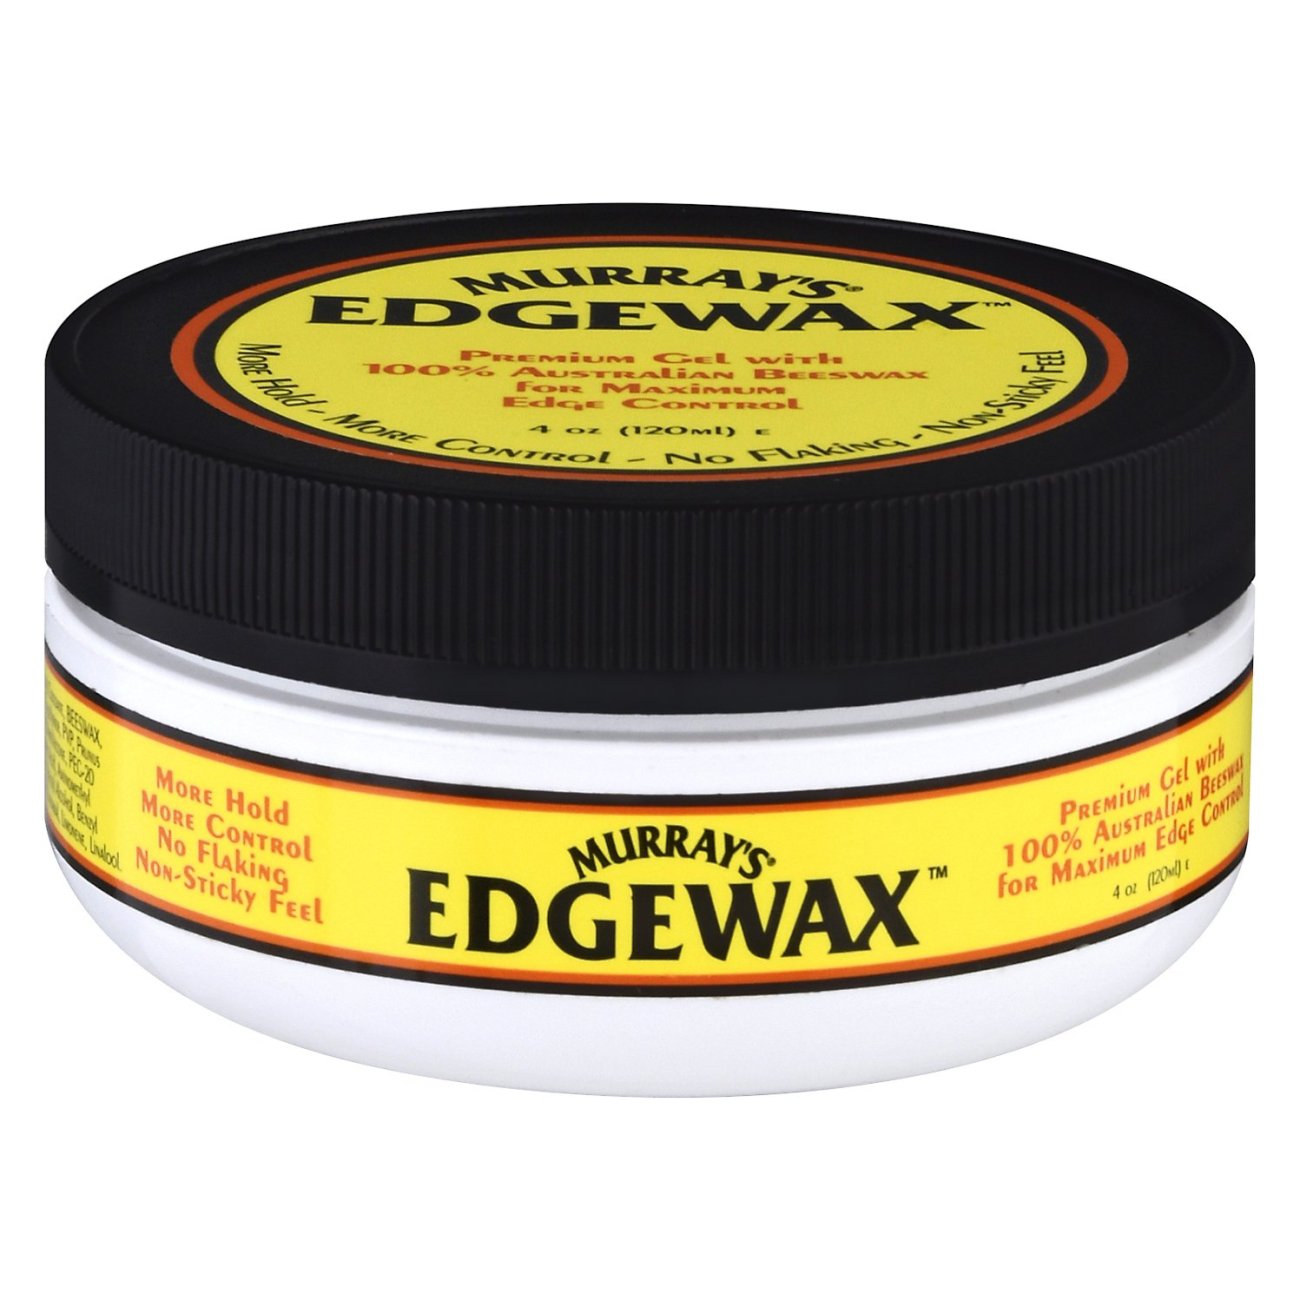 Murray's Edgewax - Shop Styling Products & Treatments at H-E-B